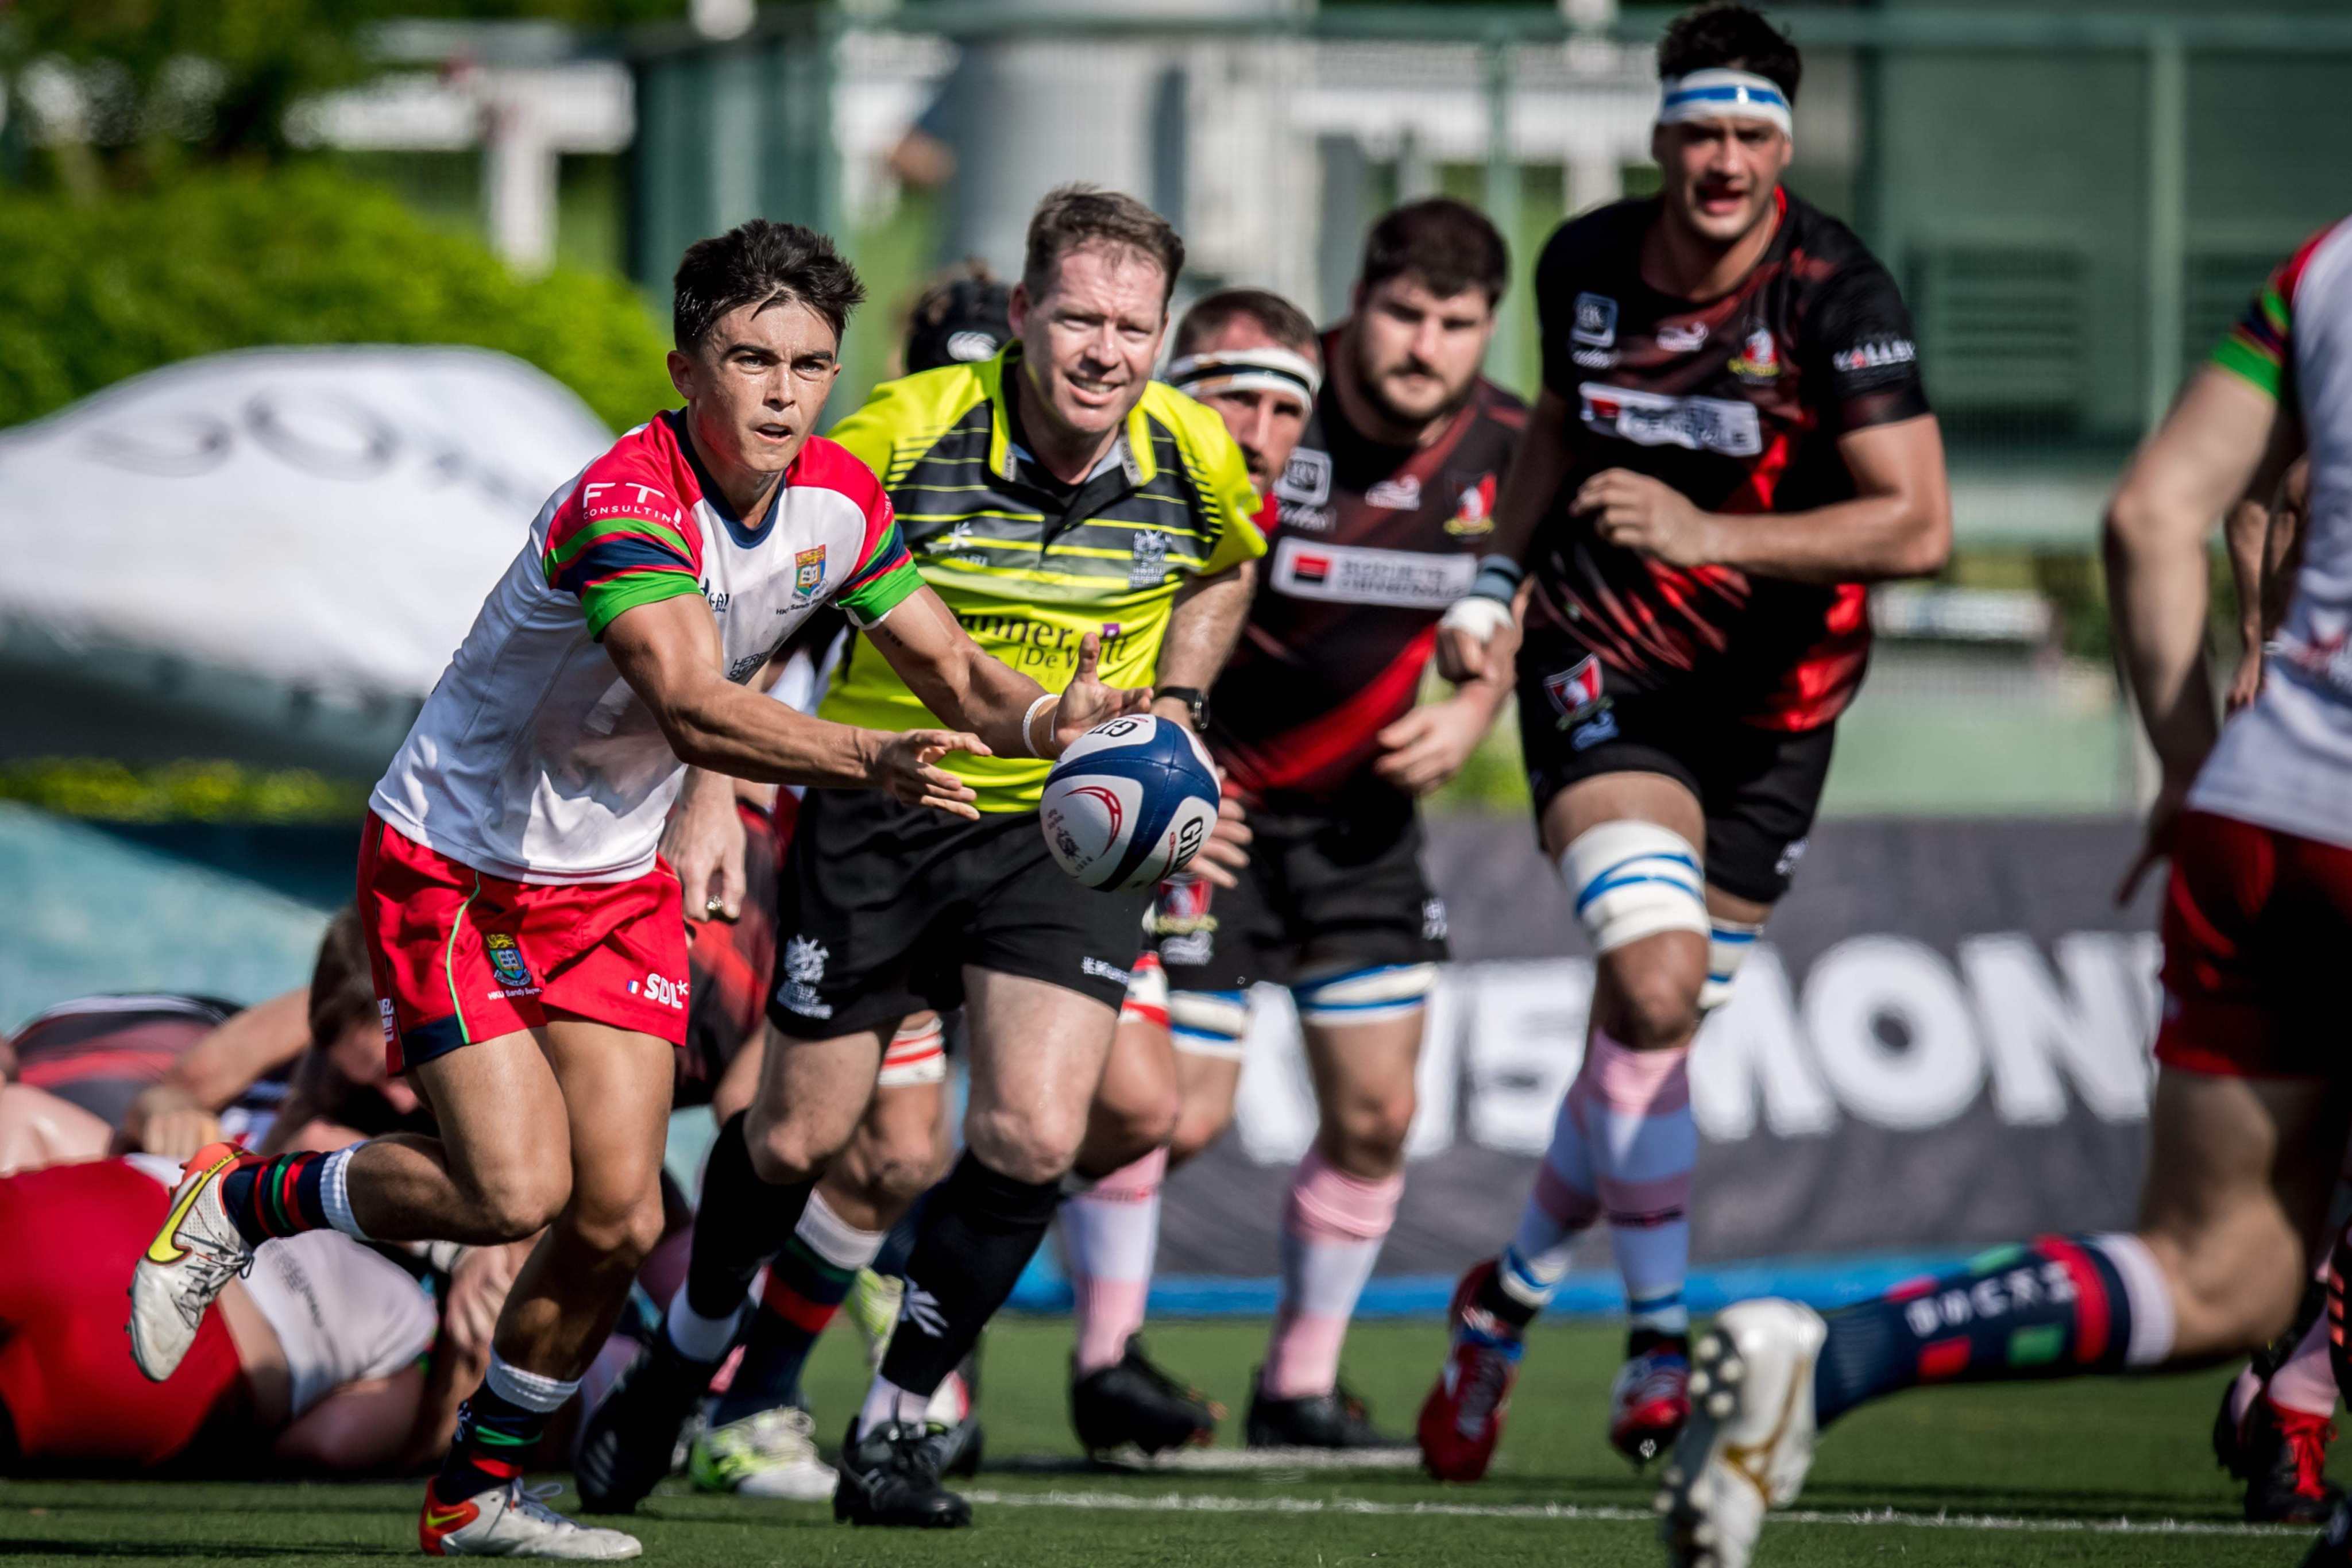 Sandy Bay’s Pat Joe Laidler will make his senior debut for the Hong Kong sevens side this weekend. Photo: Ike Images